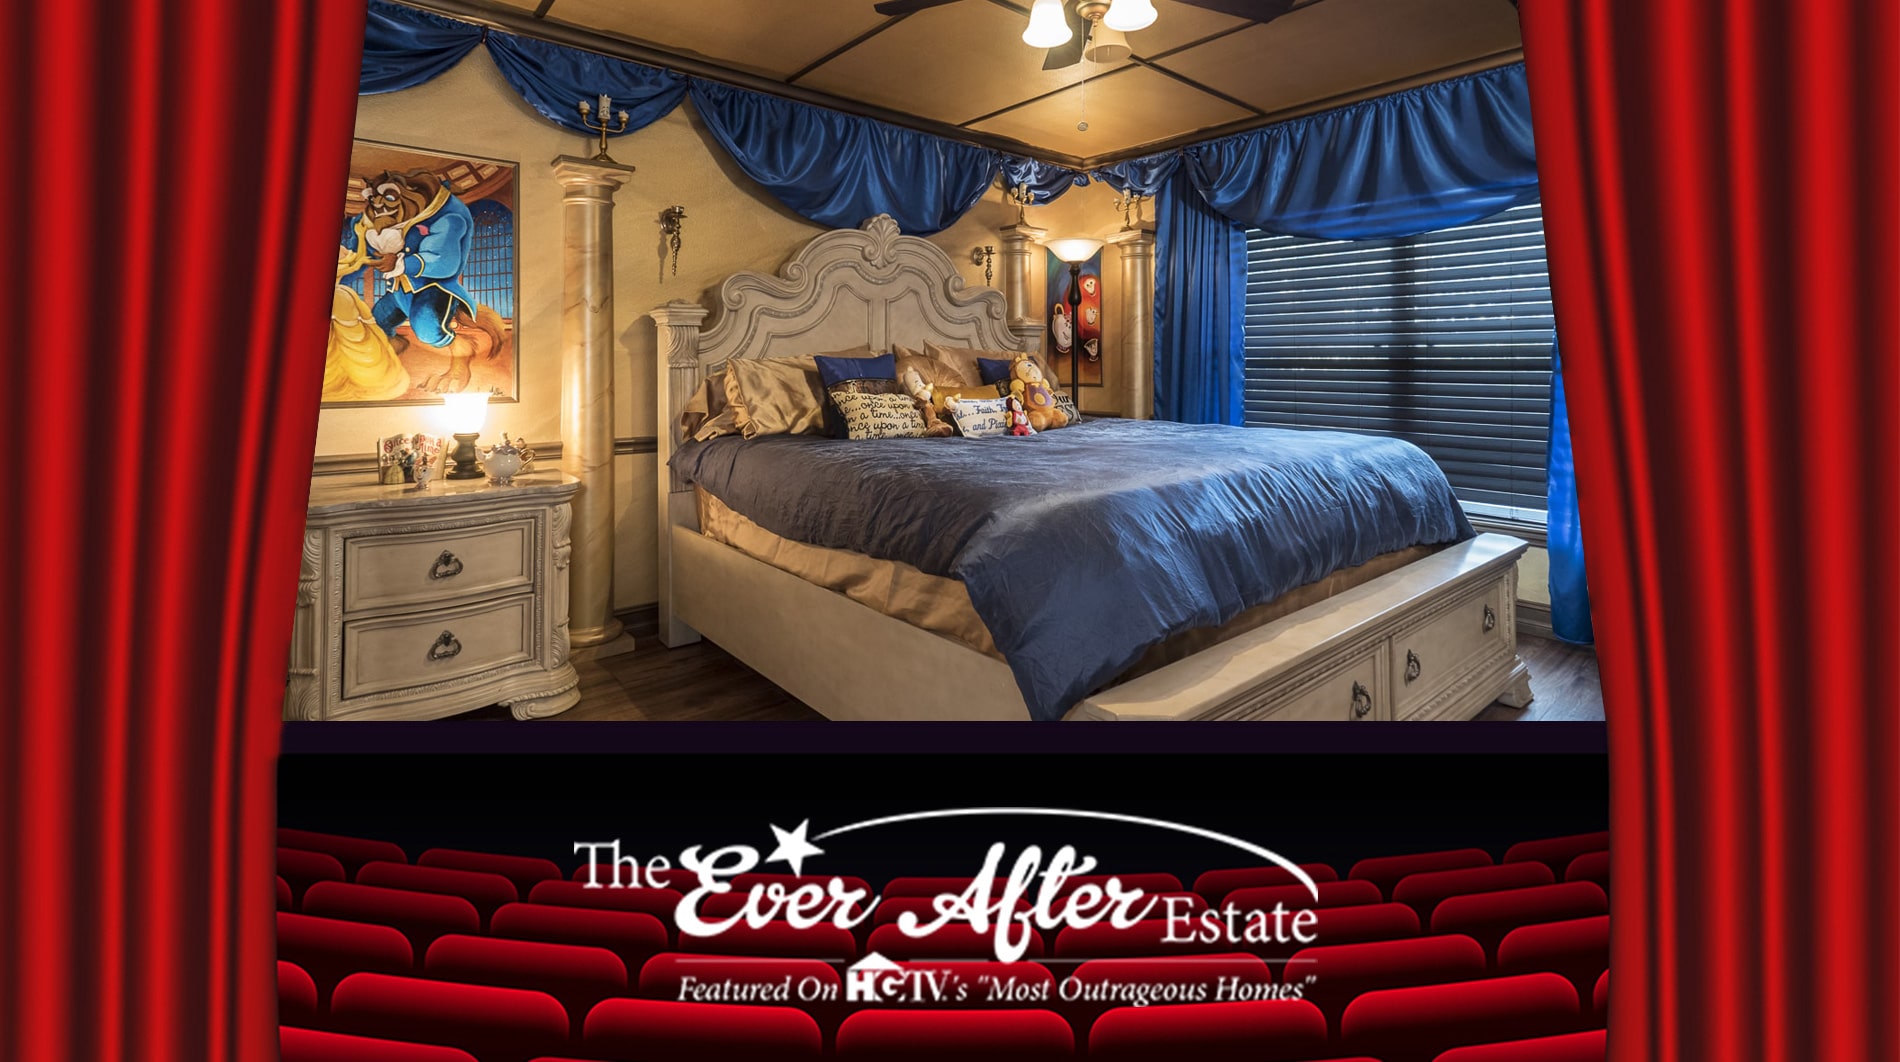 beauty and the beast bedroom in vacation rental home near Disney and Orlando